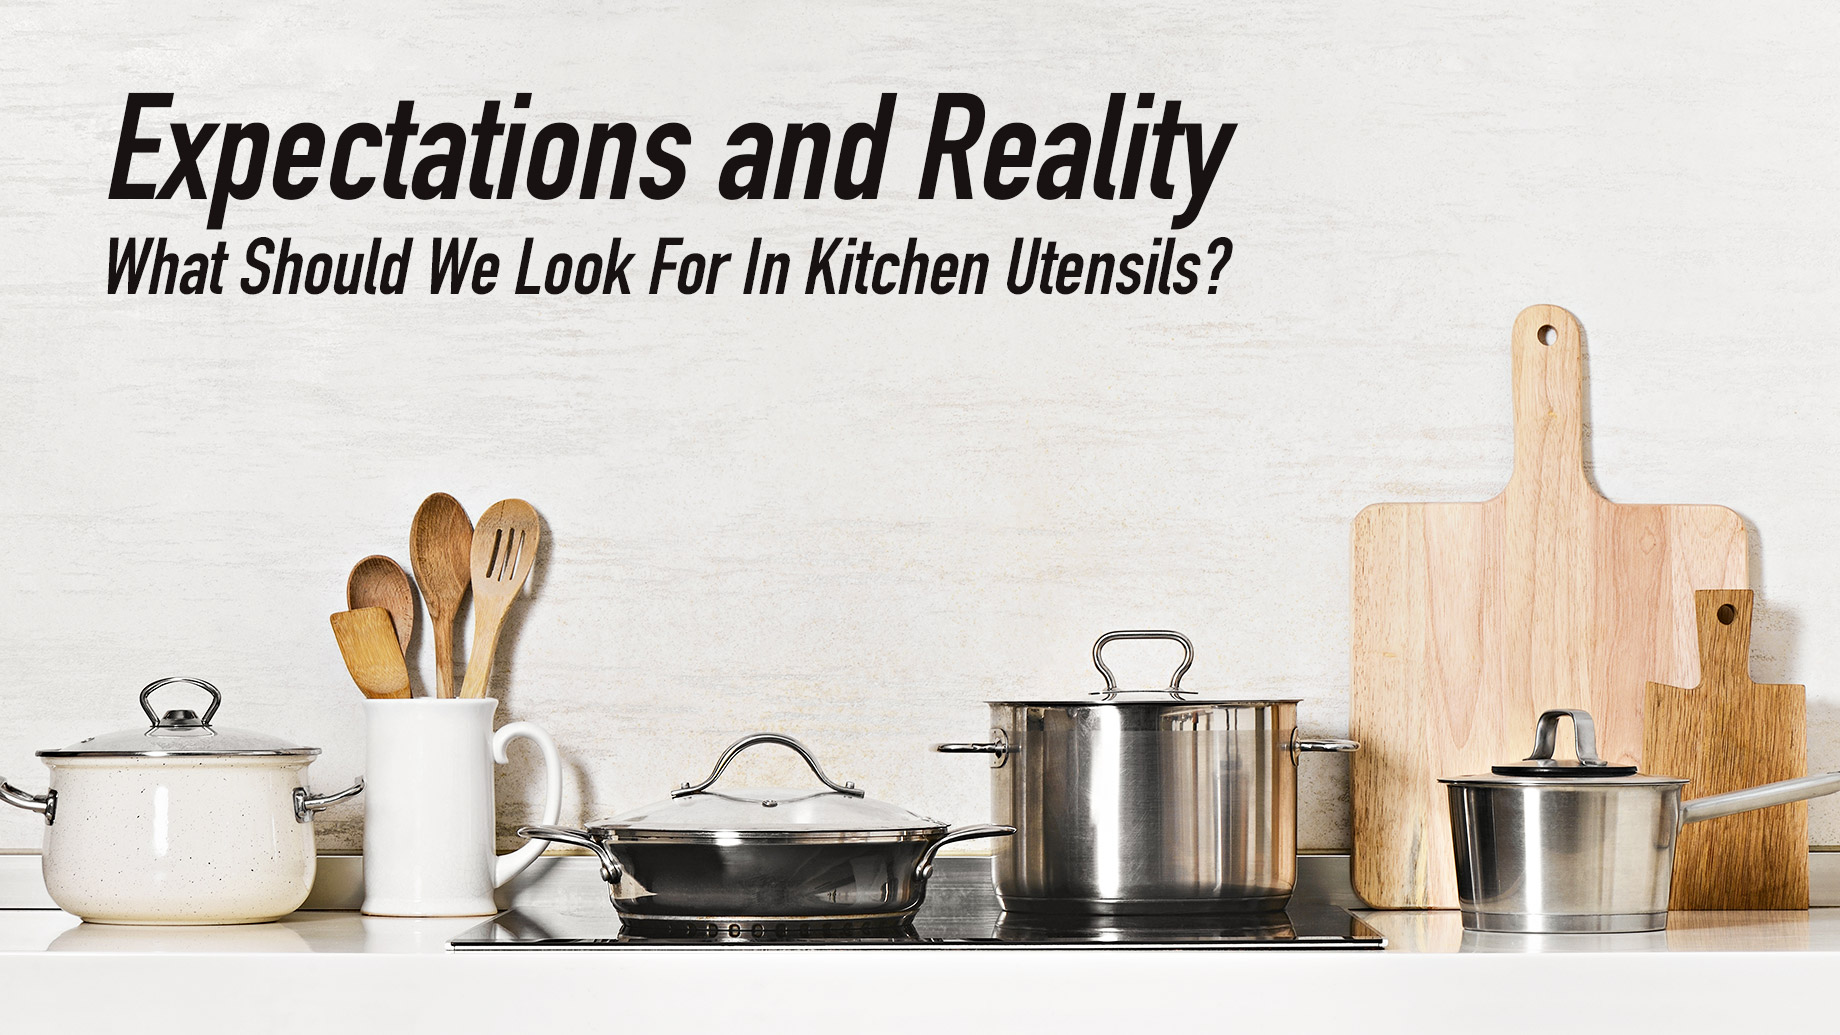 Expectations and Reality - What Should We Look For In Kitchen Utensils?